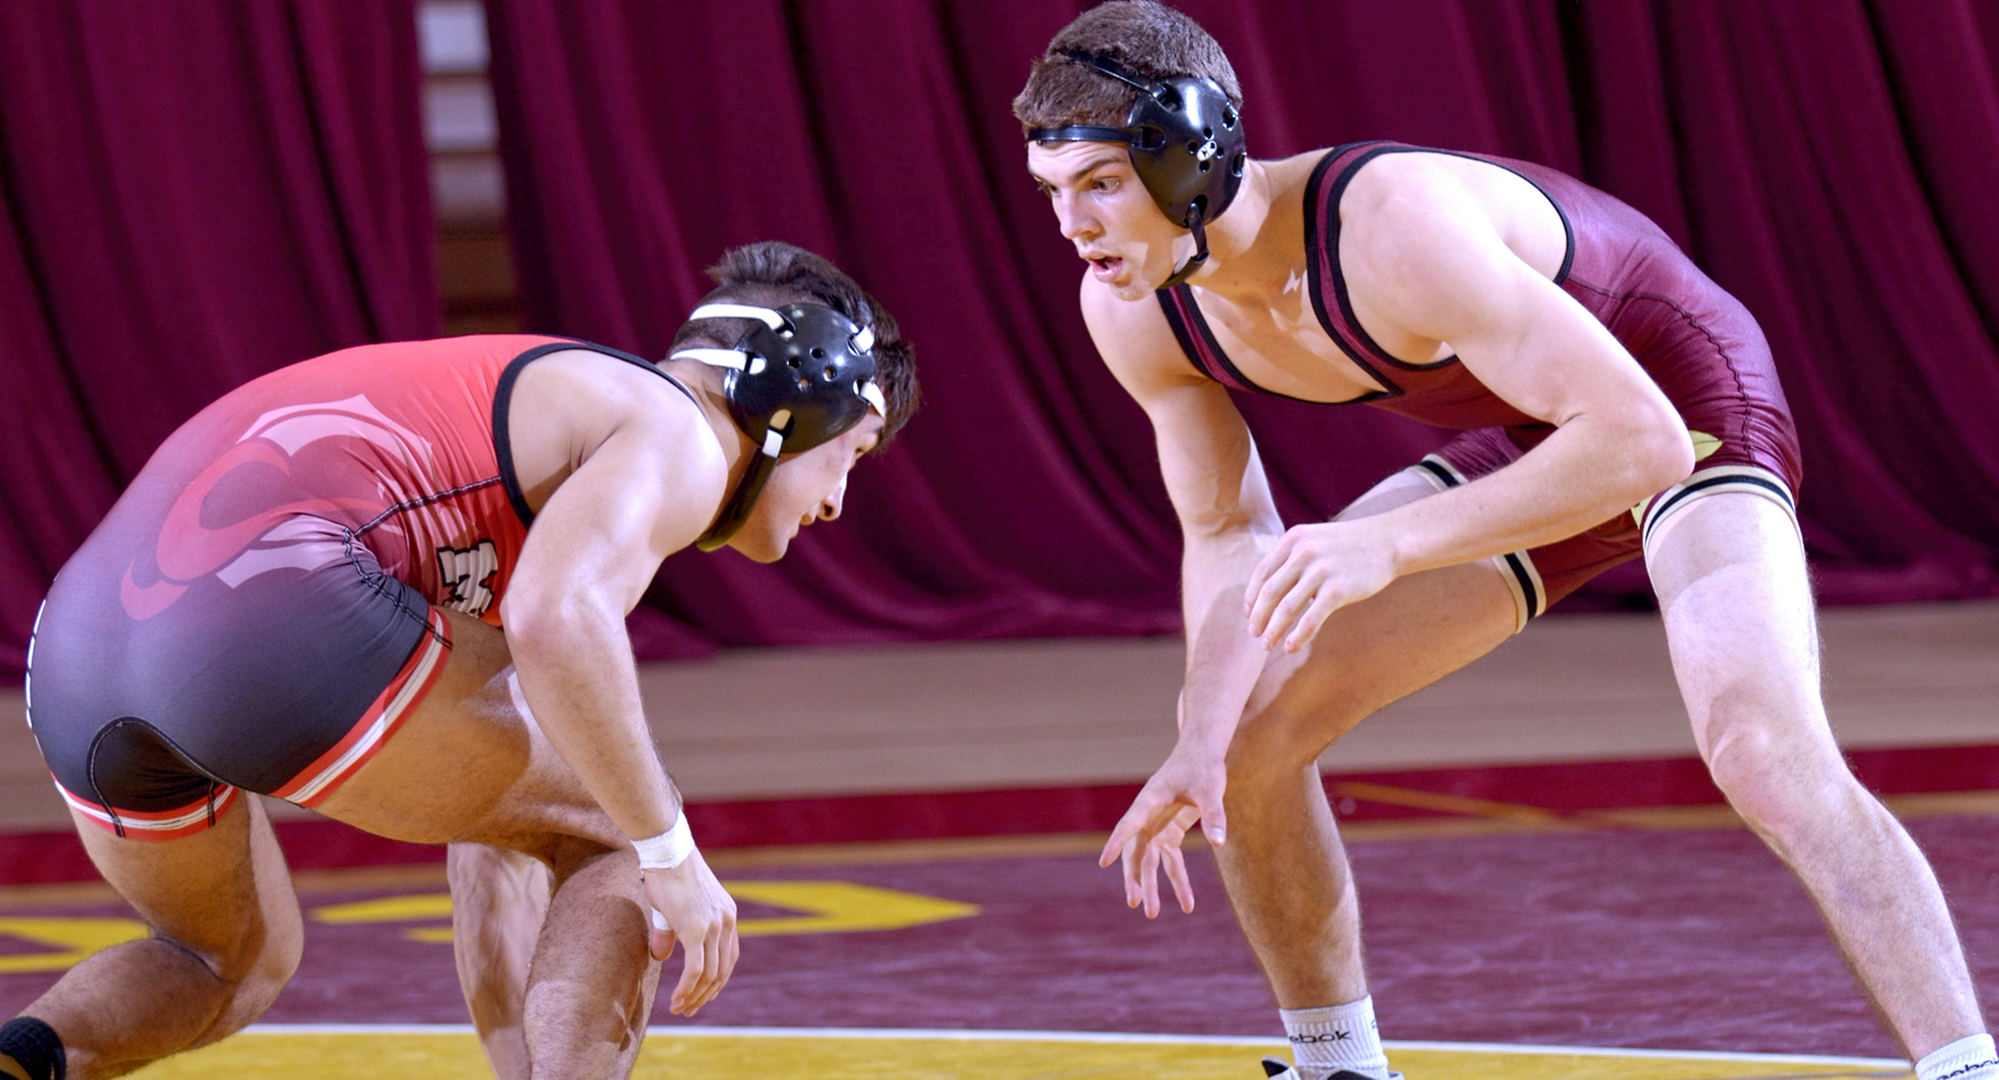 Adam Presler was one of three juniors to earn wins against Northern State. Presler is now 11-7 on the year.